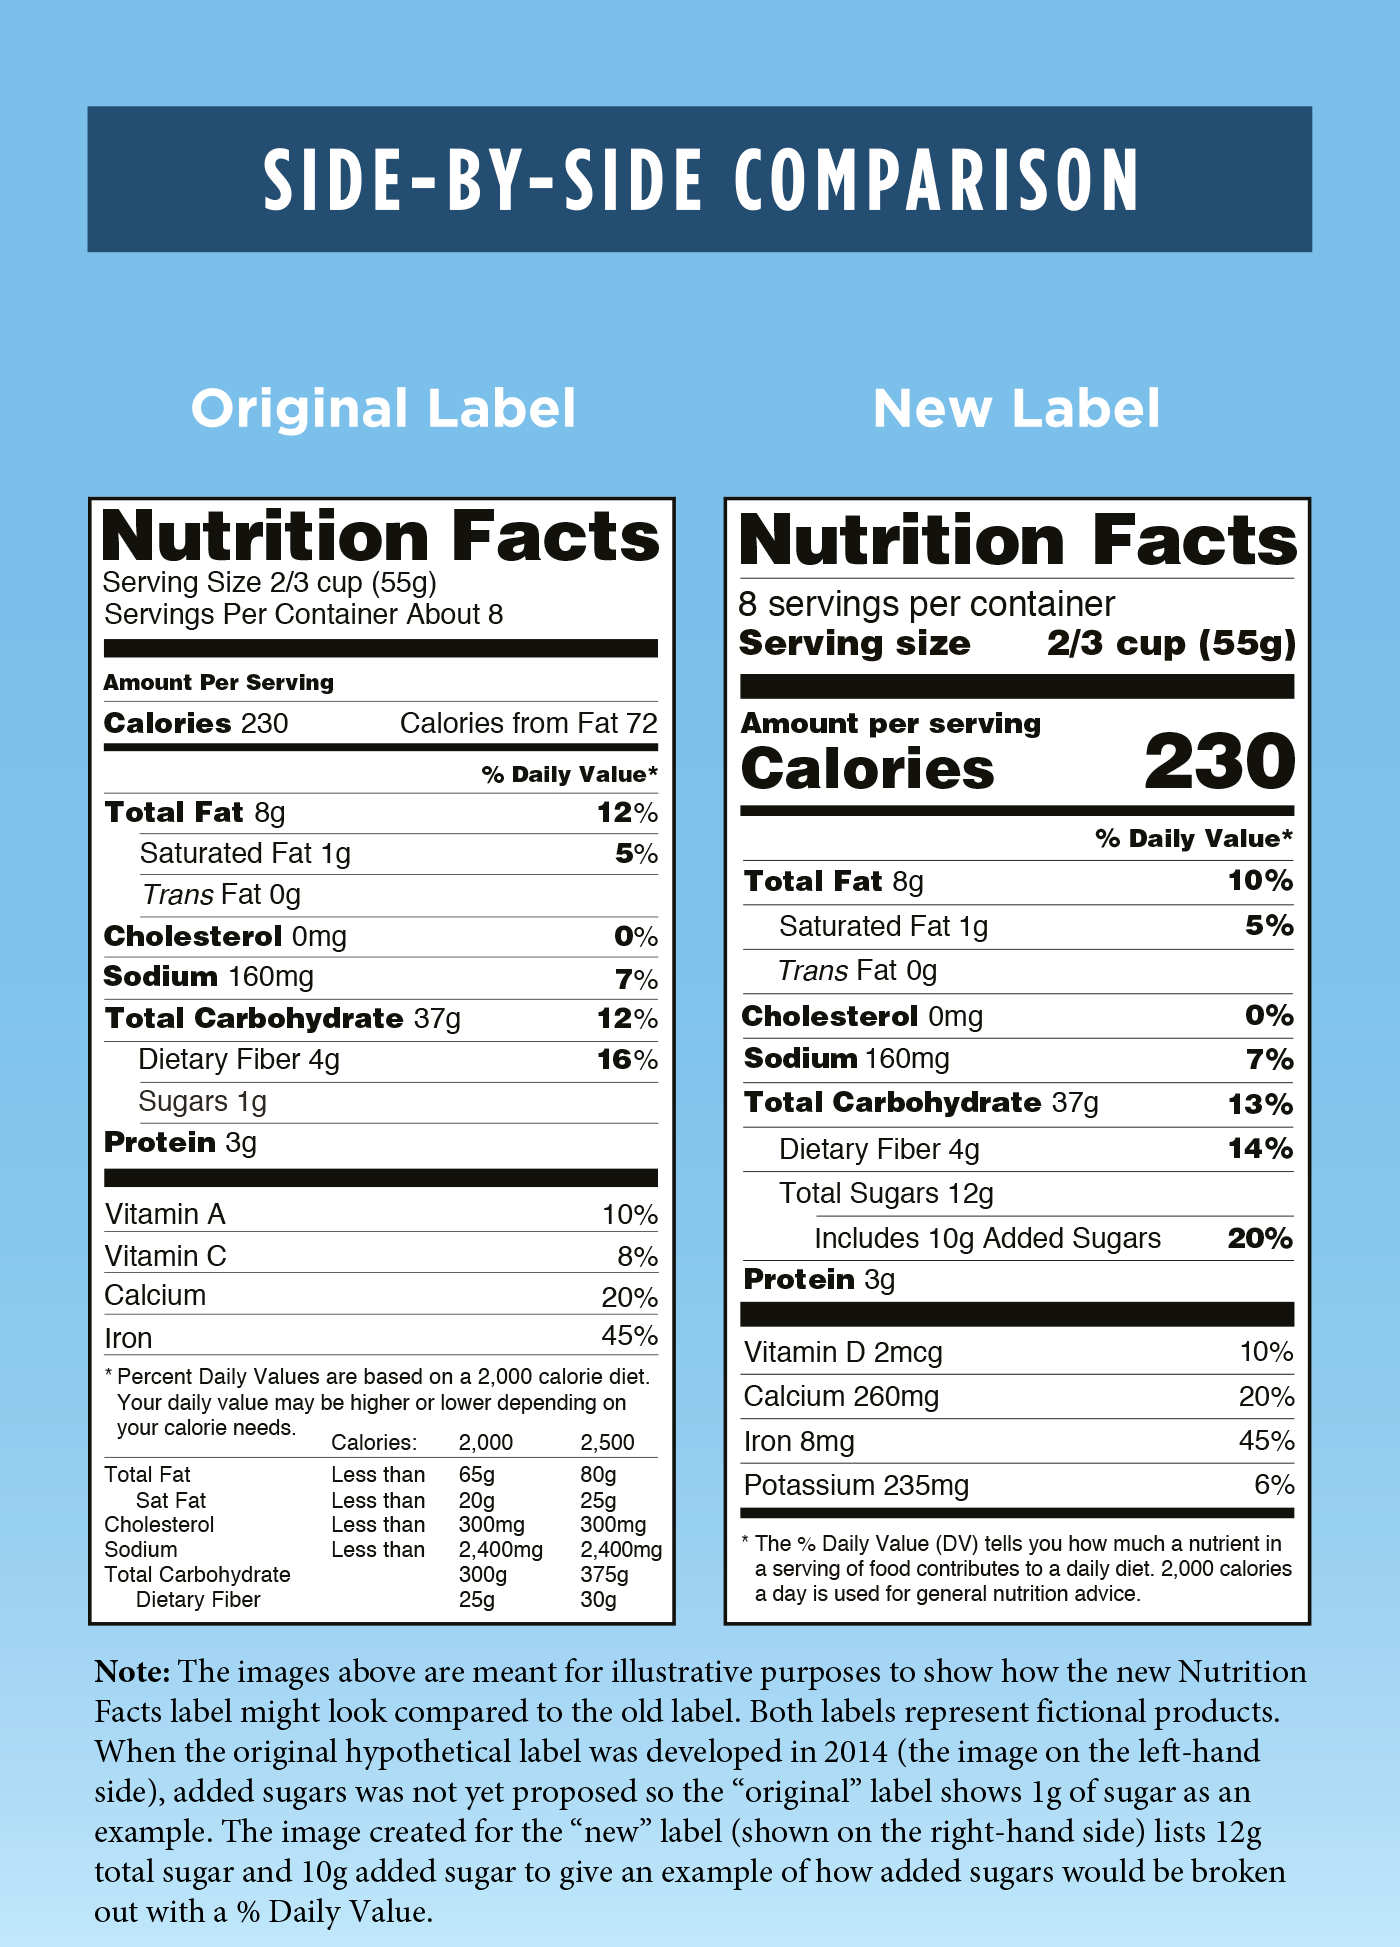 FDA Nutrition Label Updates What You Need to Know Digital Color Inc.